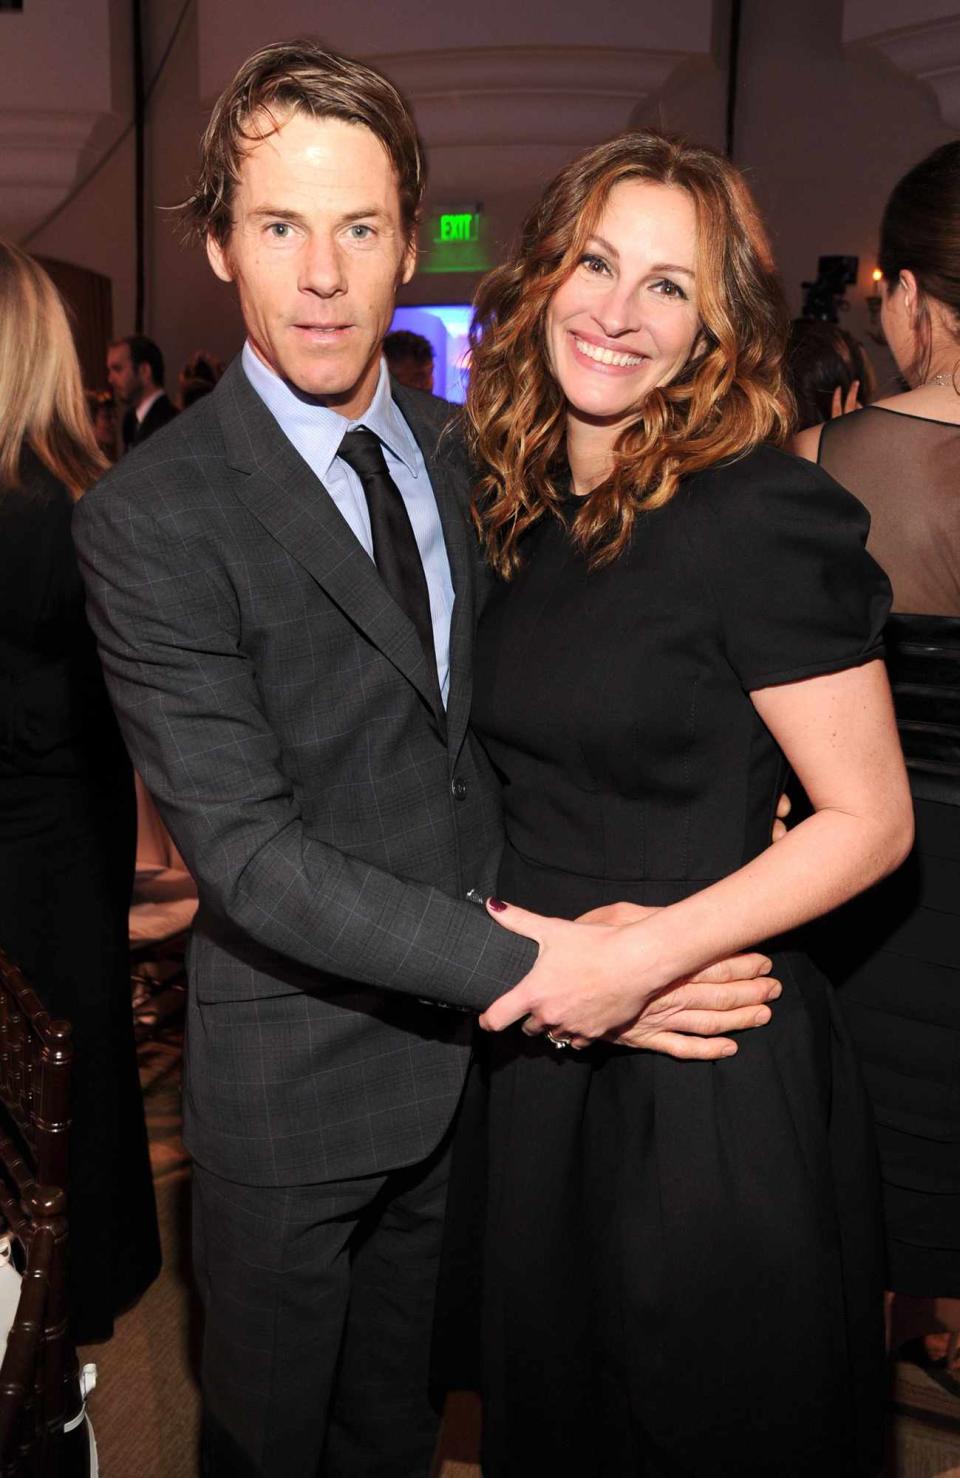 Danny Moder and Julia Roberts attend the 3rd annual Sean Penn & Friends HELP HAITI HOME Gala benefiting J/P HRO presented by Giorgio Armani at Montage Beverly Hills on January 11, 2014 in Beverly Hills, California